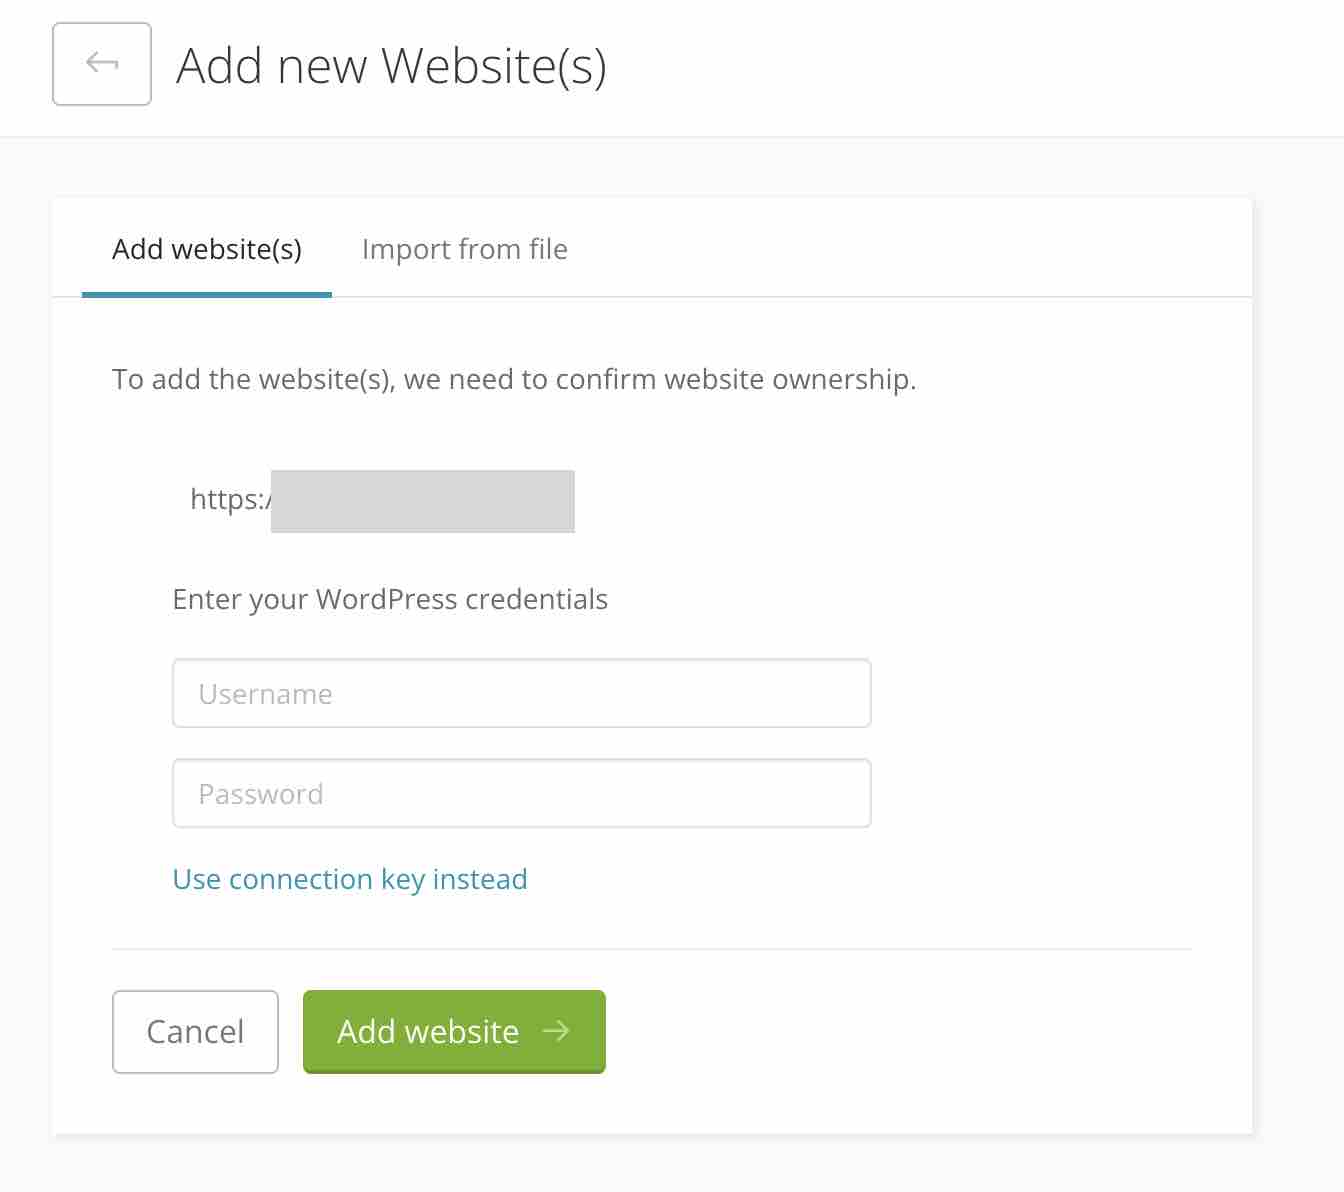 Add your site credentials in the ManageWP interface. 